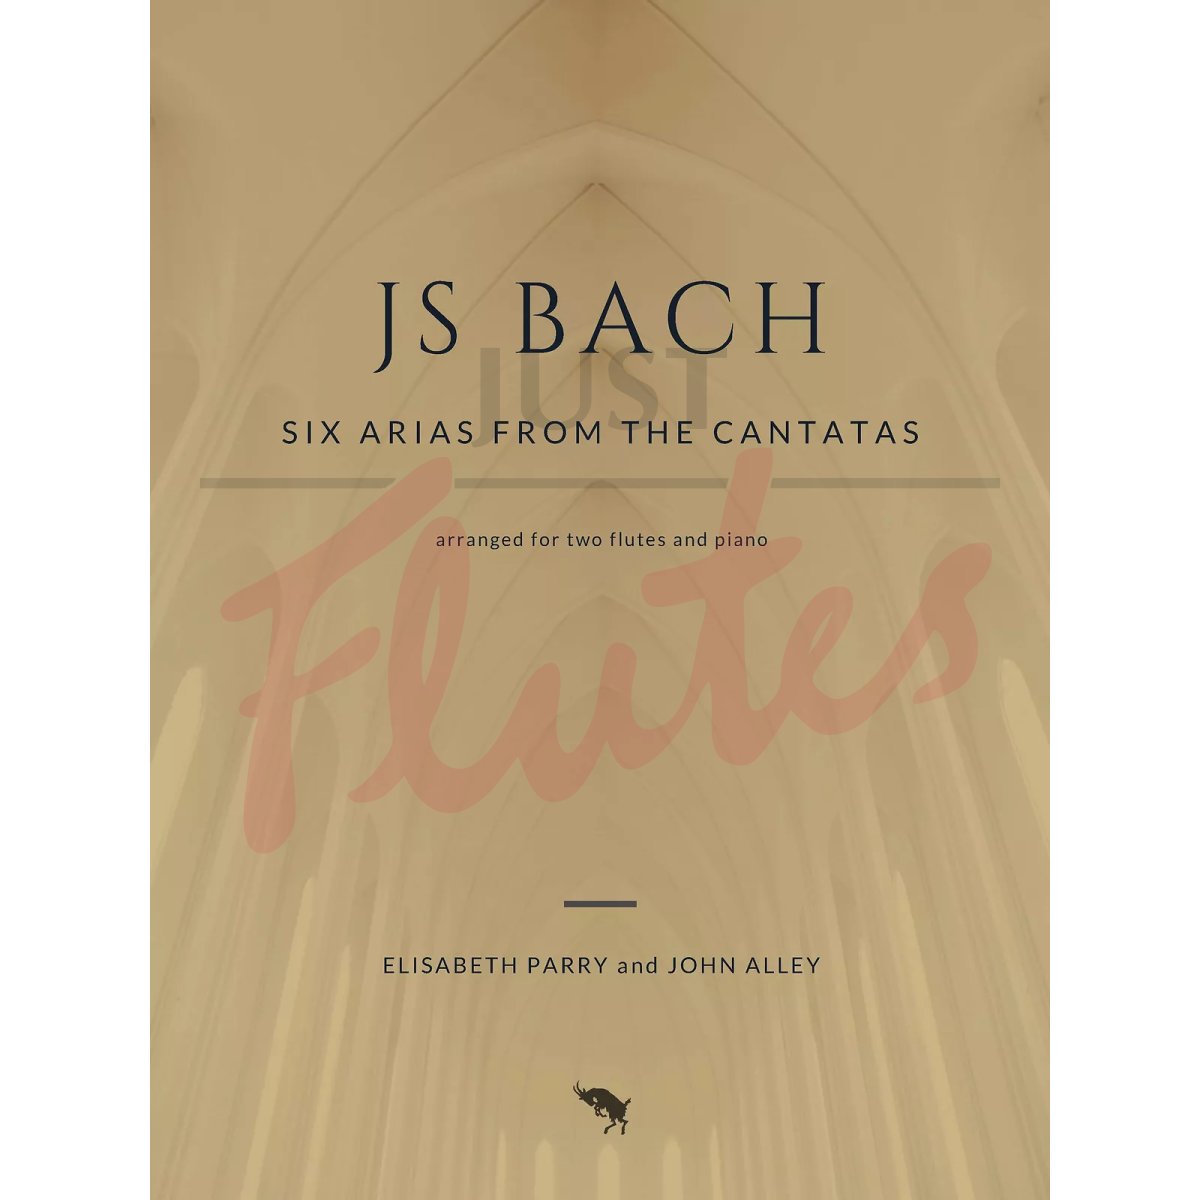 Six Arias from the Cantatas for Two Flutes and Piano